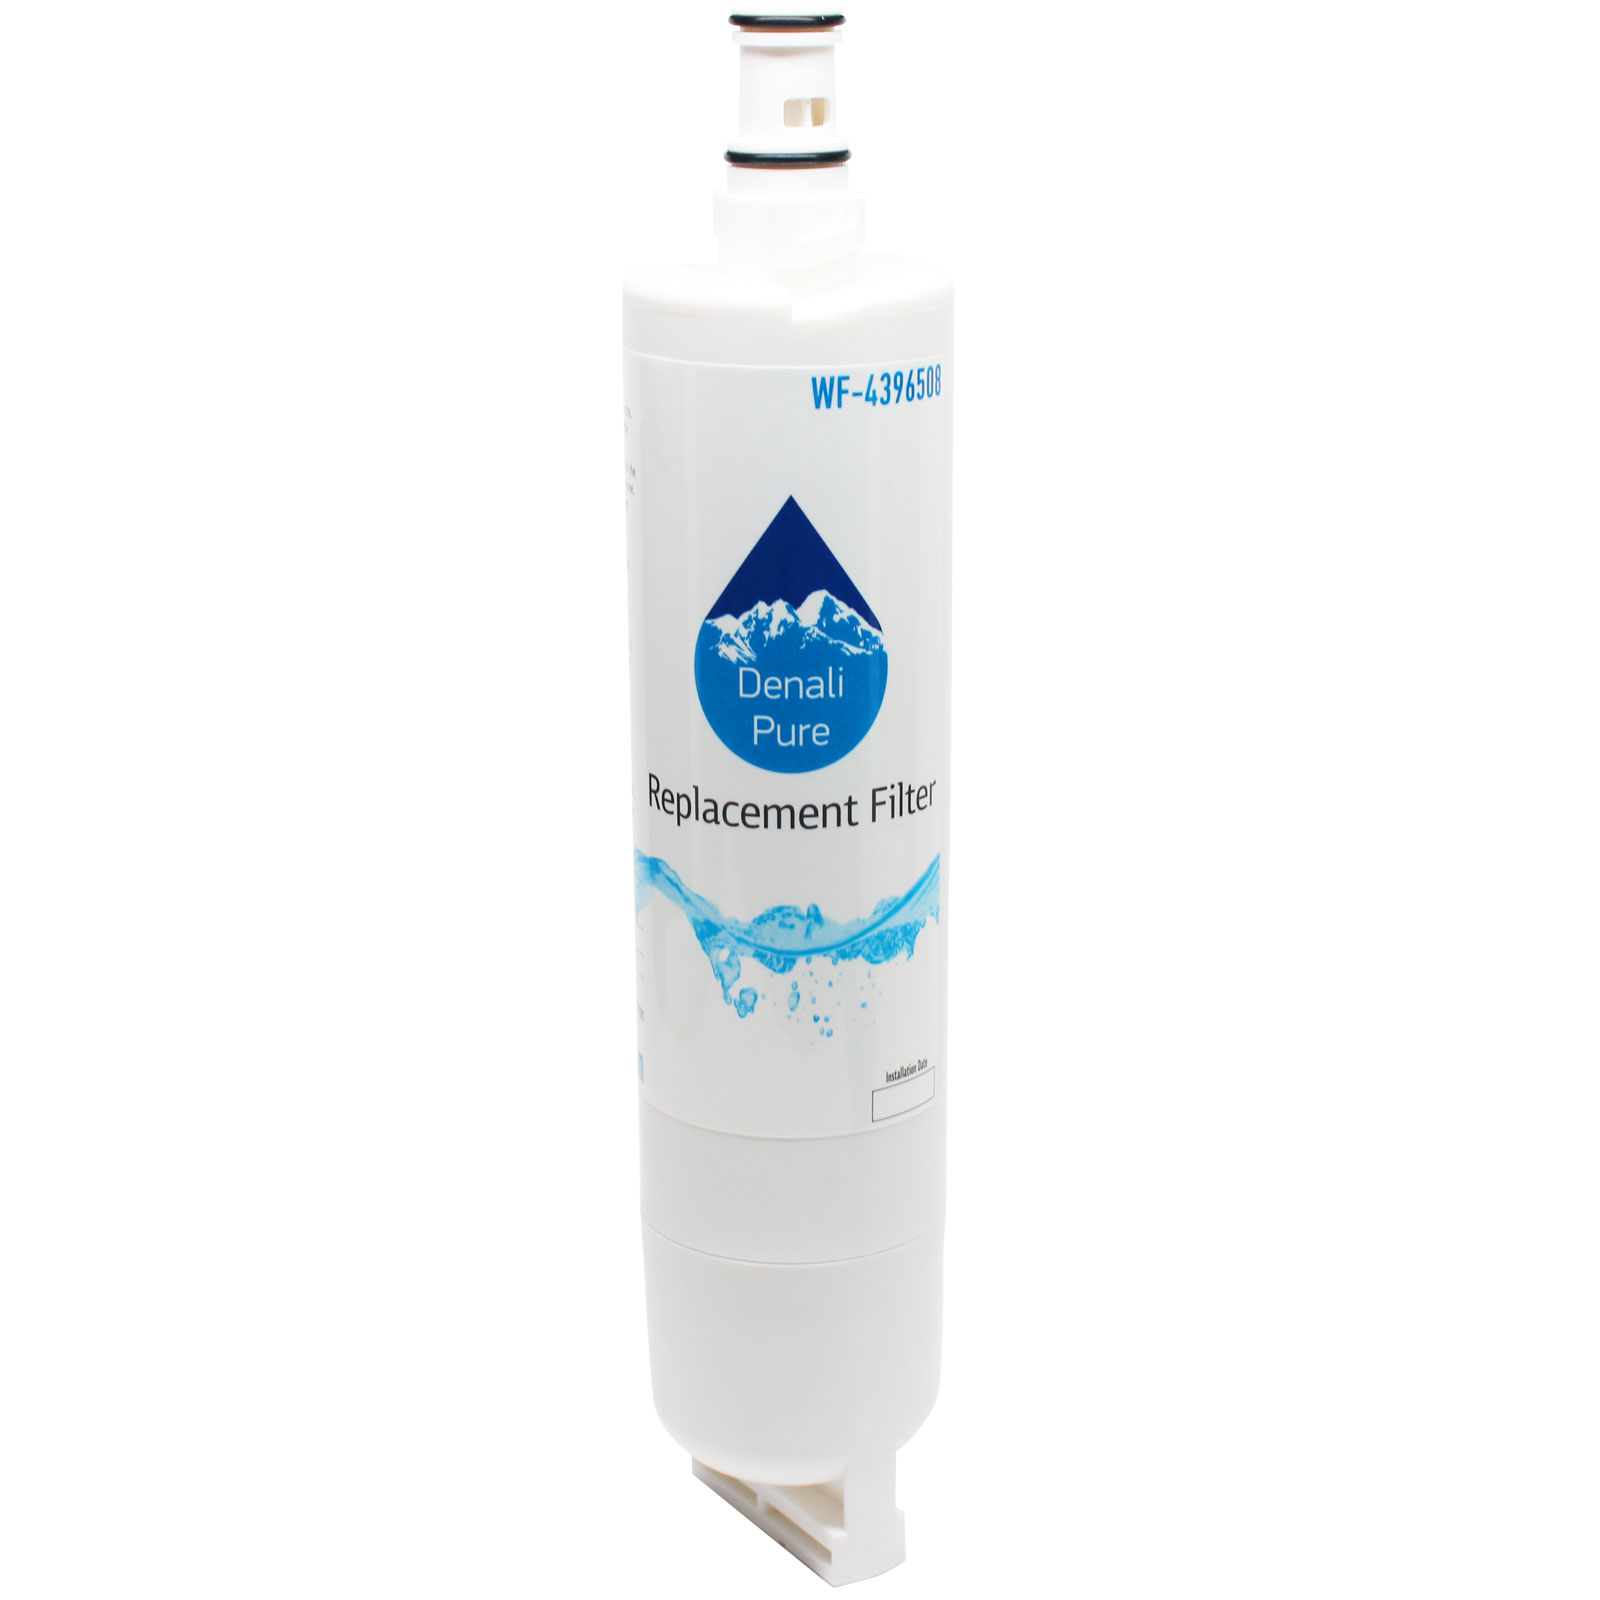 Replacement Whirlpool ED5GHEXNQ00 Refrigerator Water Filter - Compatible Whirlpool 4396508, 4396510 Fridge Water Filter Cartridge - image 2 of 4